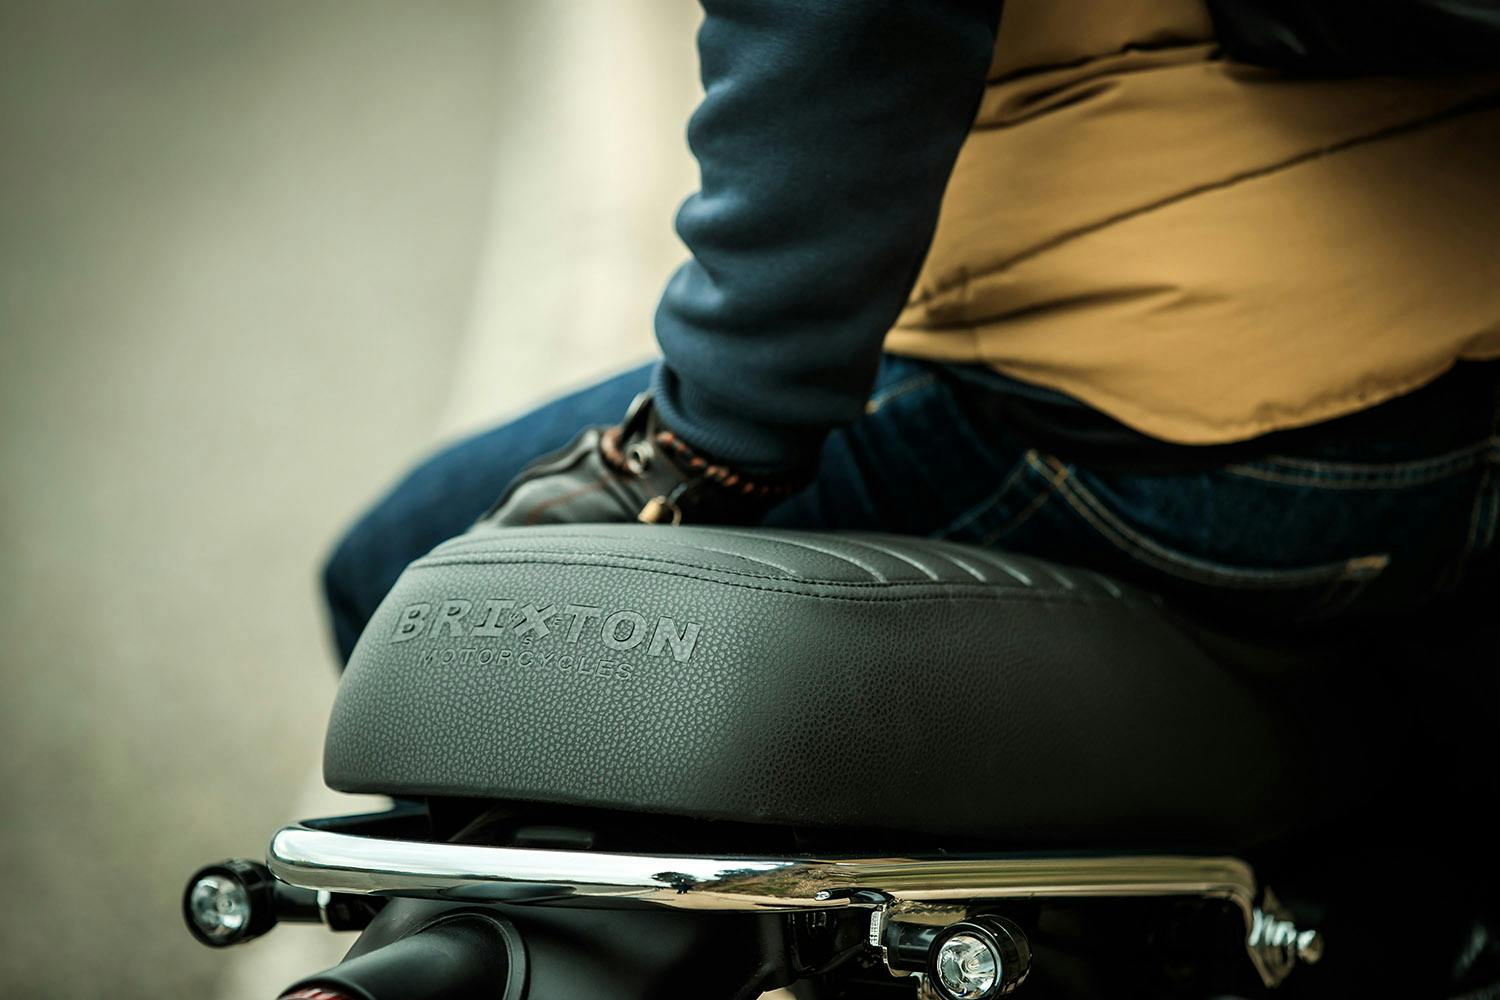 Brixton Felsberg 125 XC in Quick Silver  leather seat detail